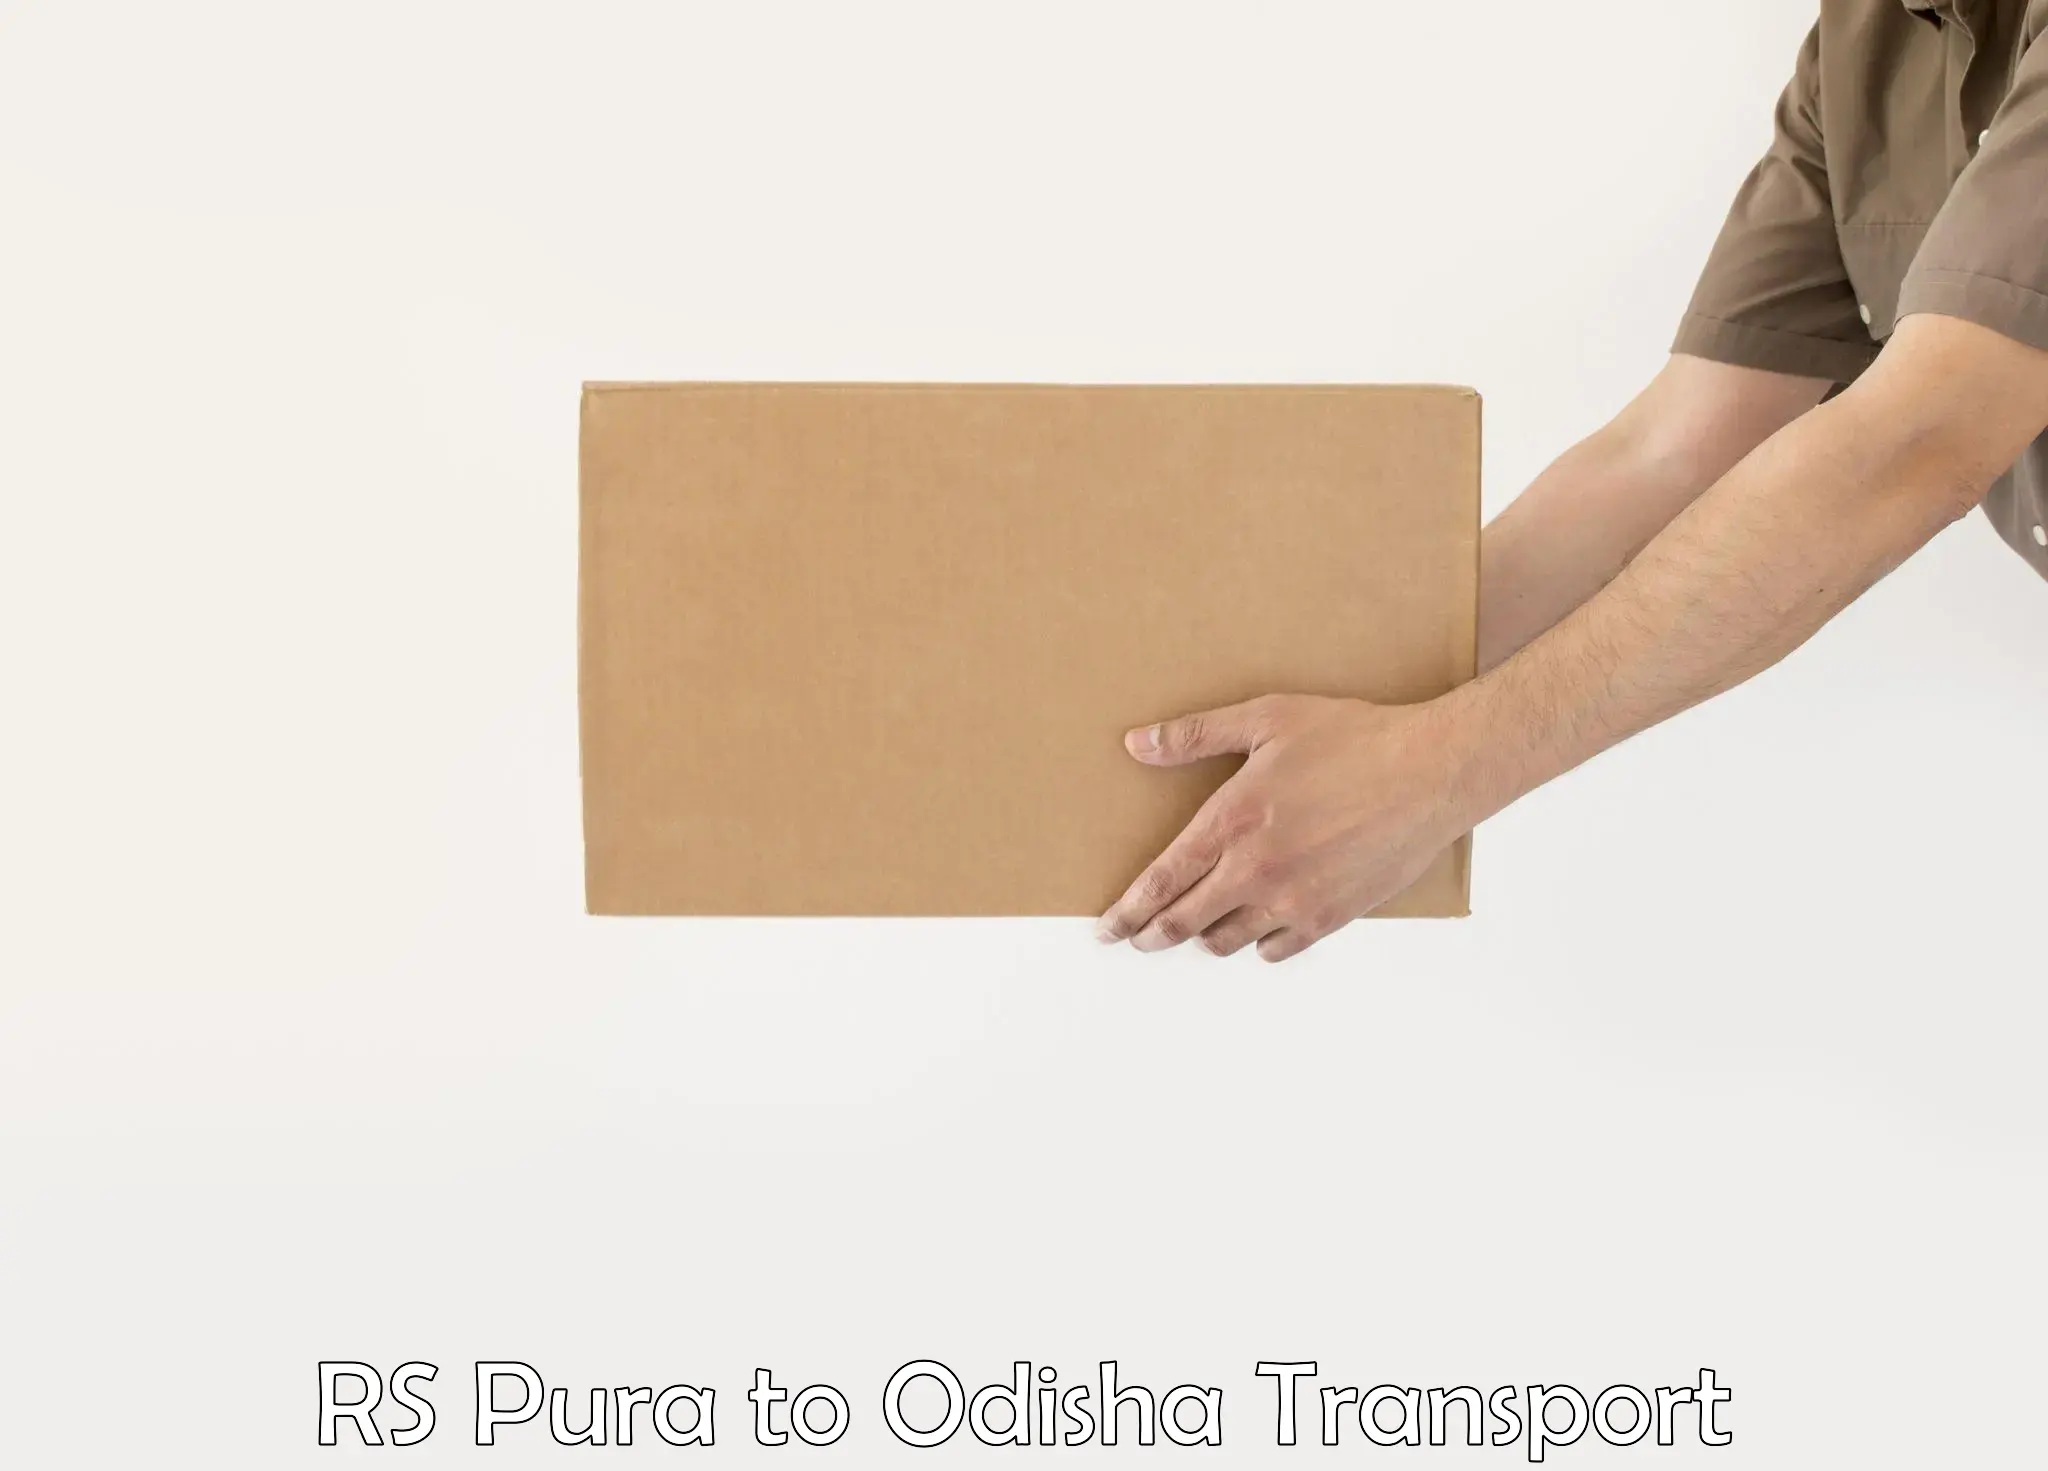 Parcel transport services in RS Pura to Odisha